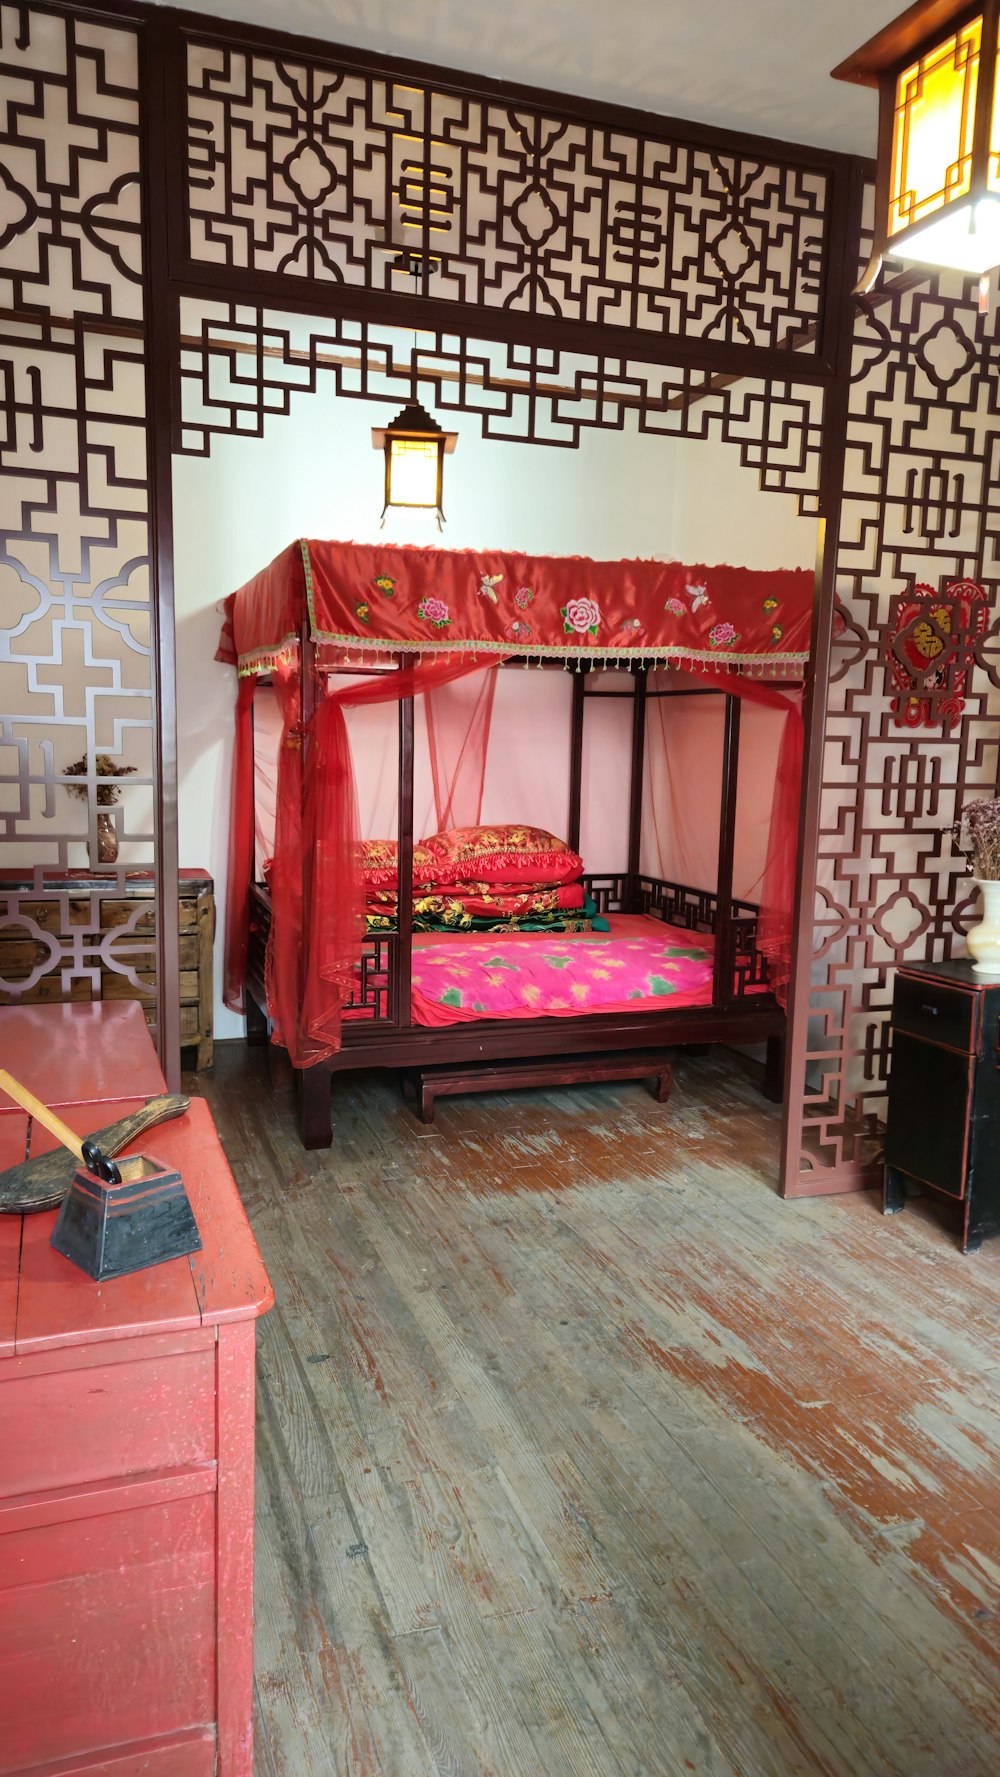 a room with a bed, dresser and lamp